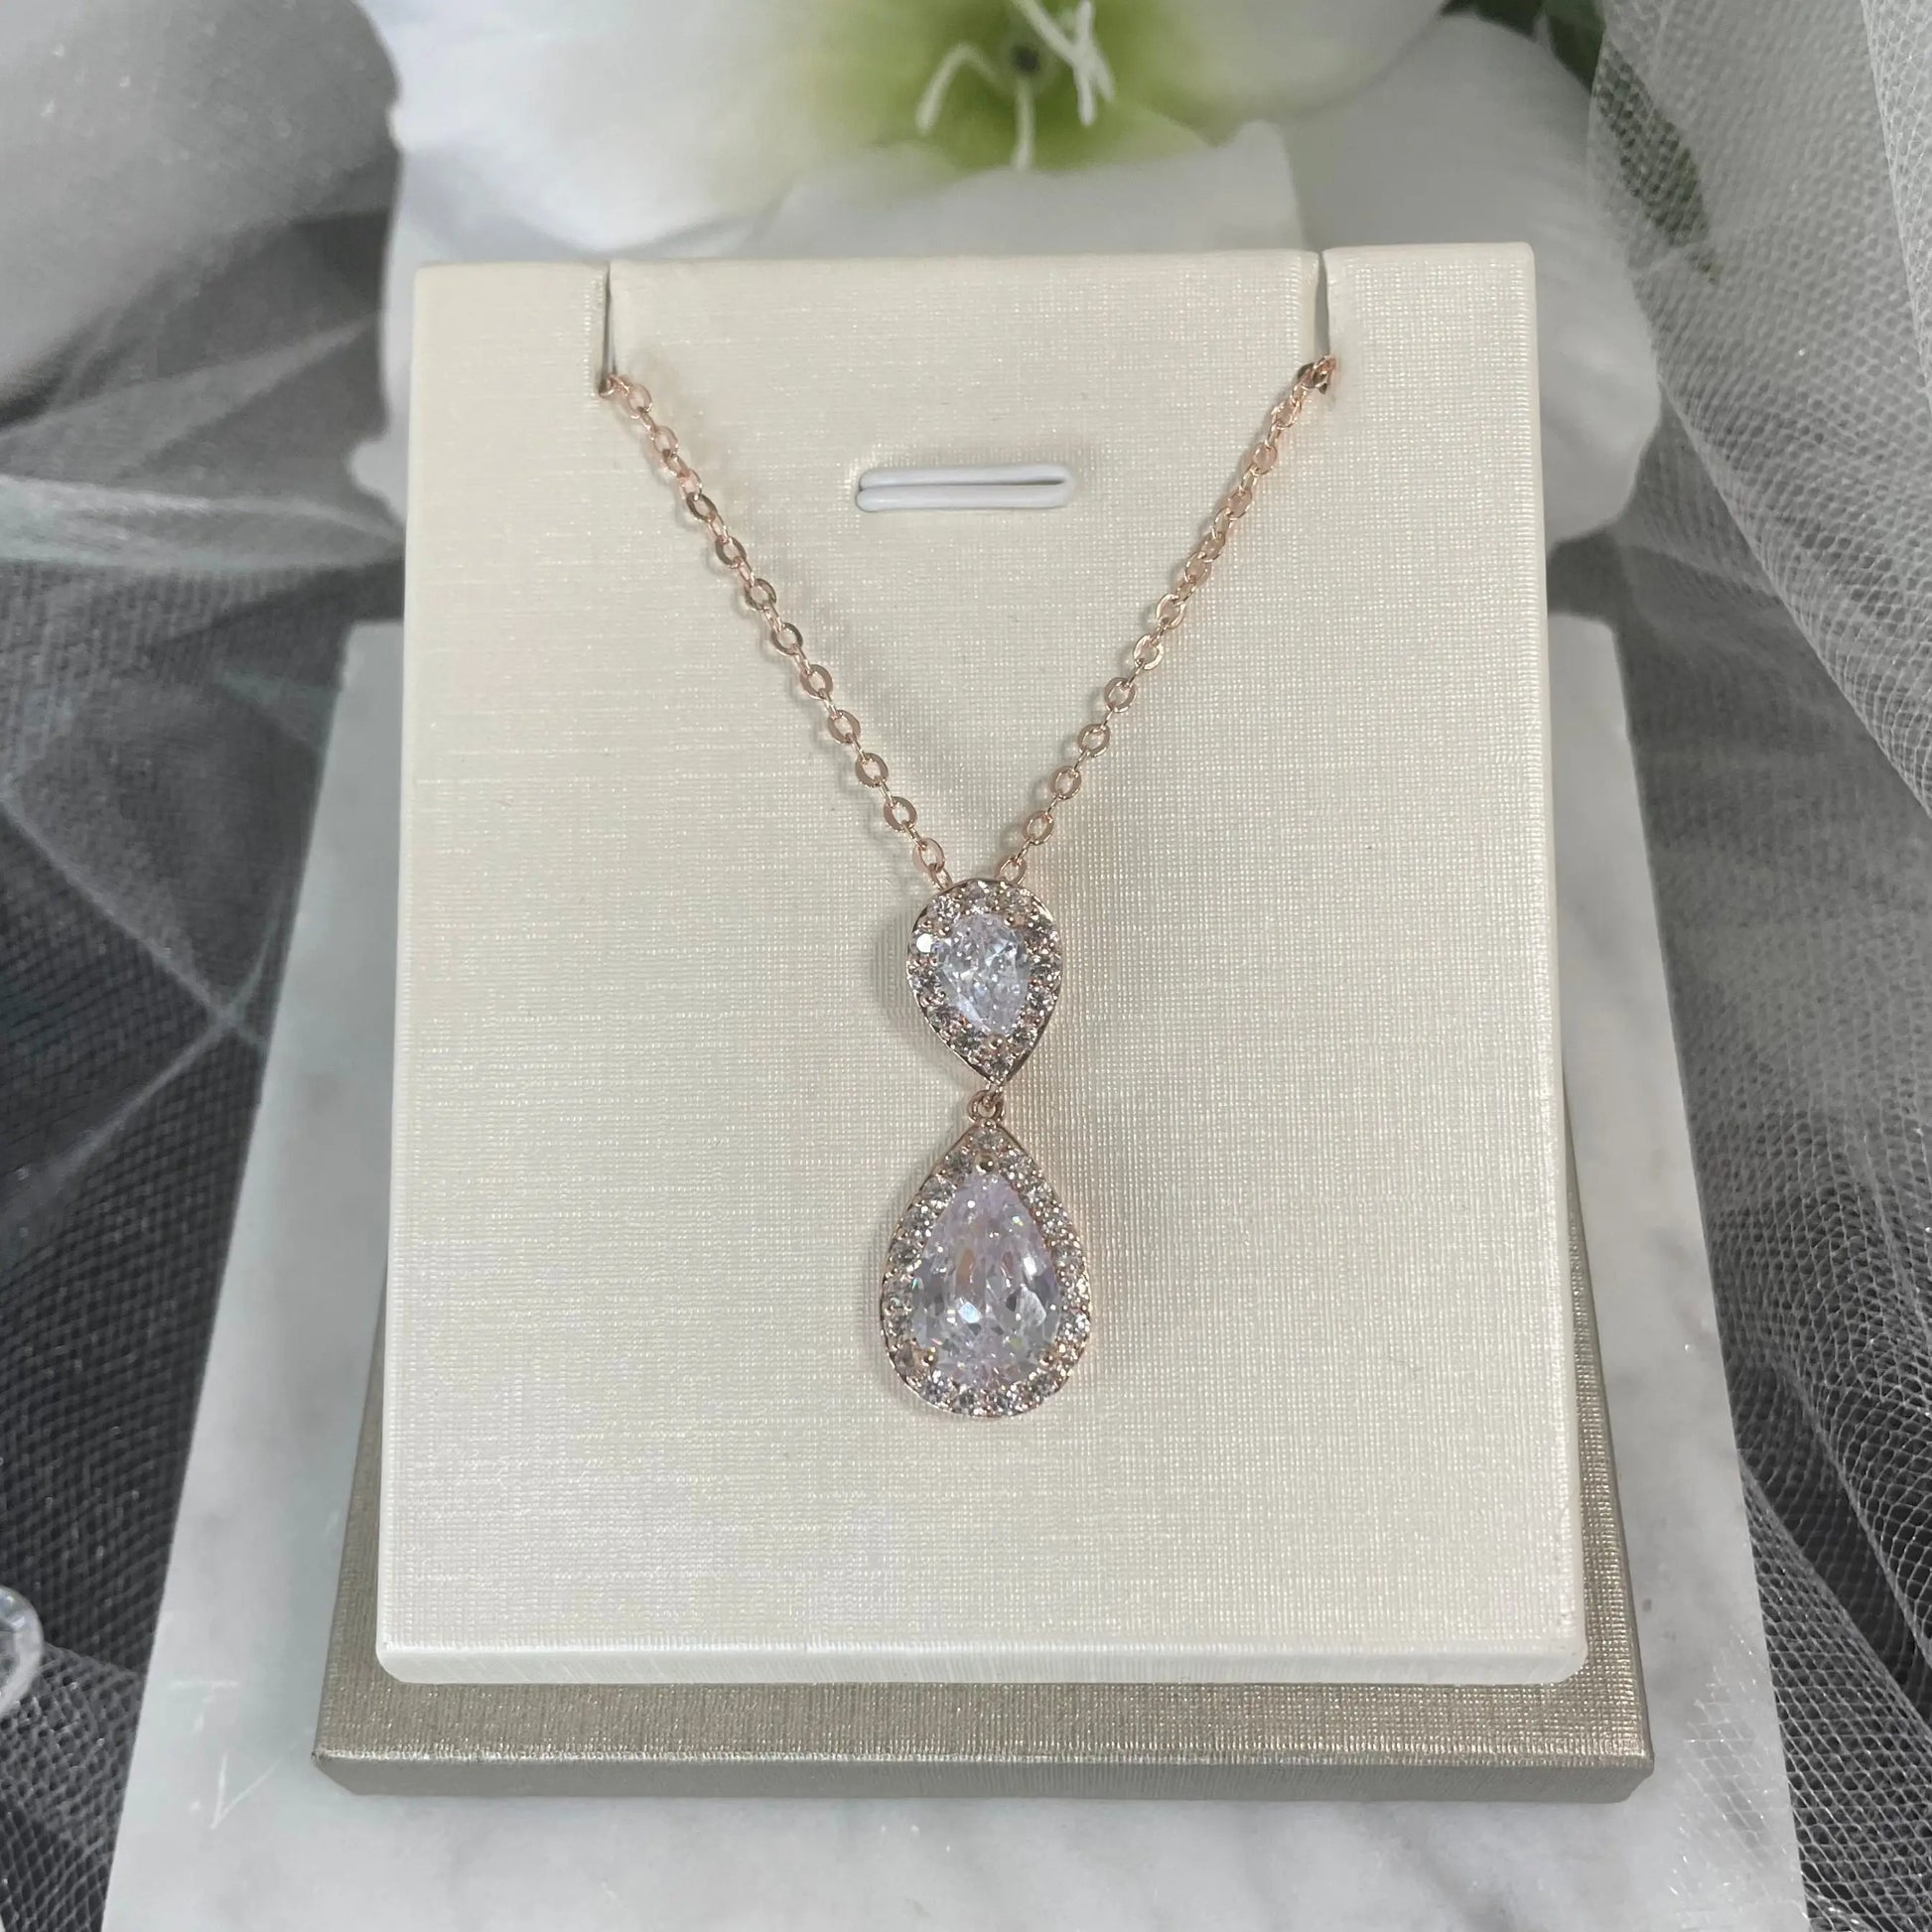 Leona Necklace (Rose Gold): A gorgeous rose gold necklace featuring a large CZ stone surrounded by smaller CZs, with a 45.5 cm chain.